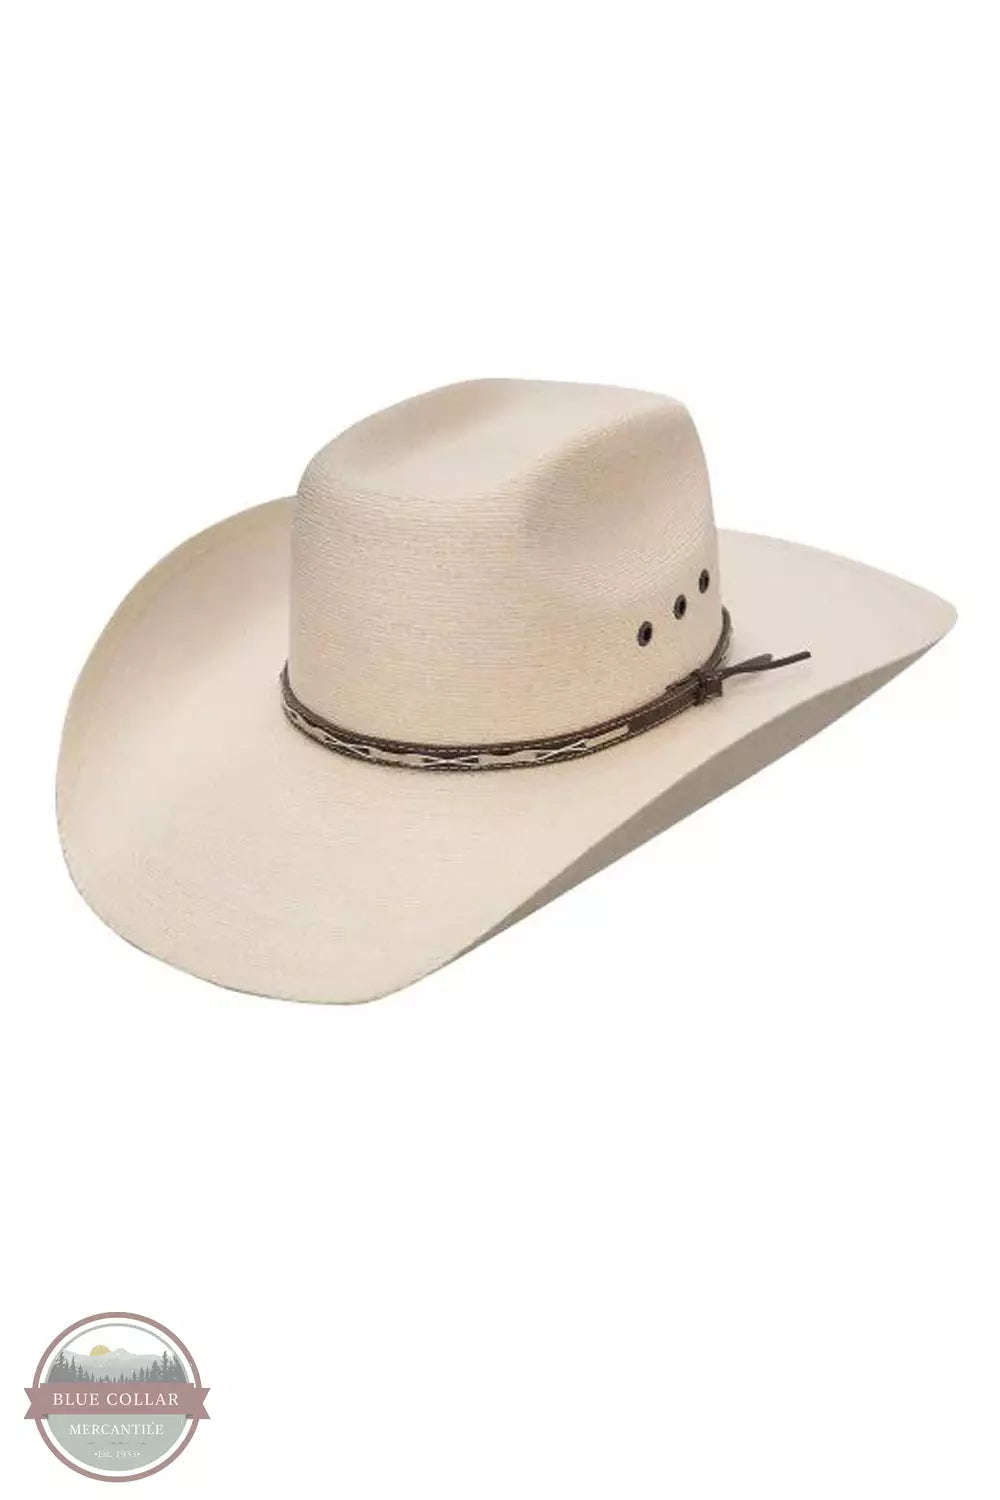 Stetson SSSQRE-7940-81 Square Eyelets Regular Oval Straw Hat Profile View